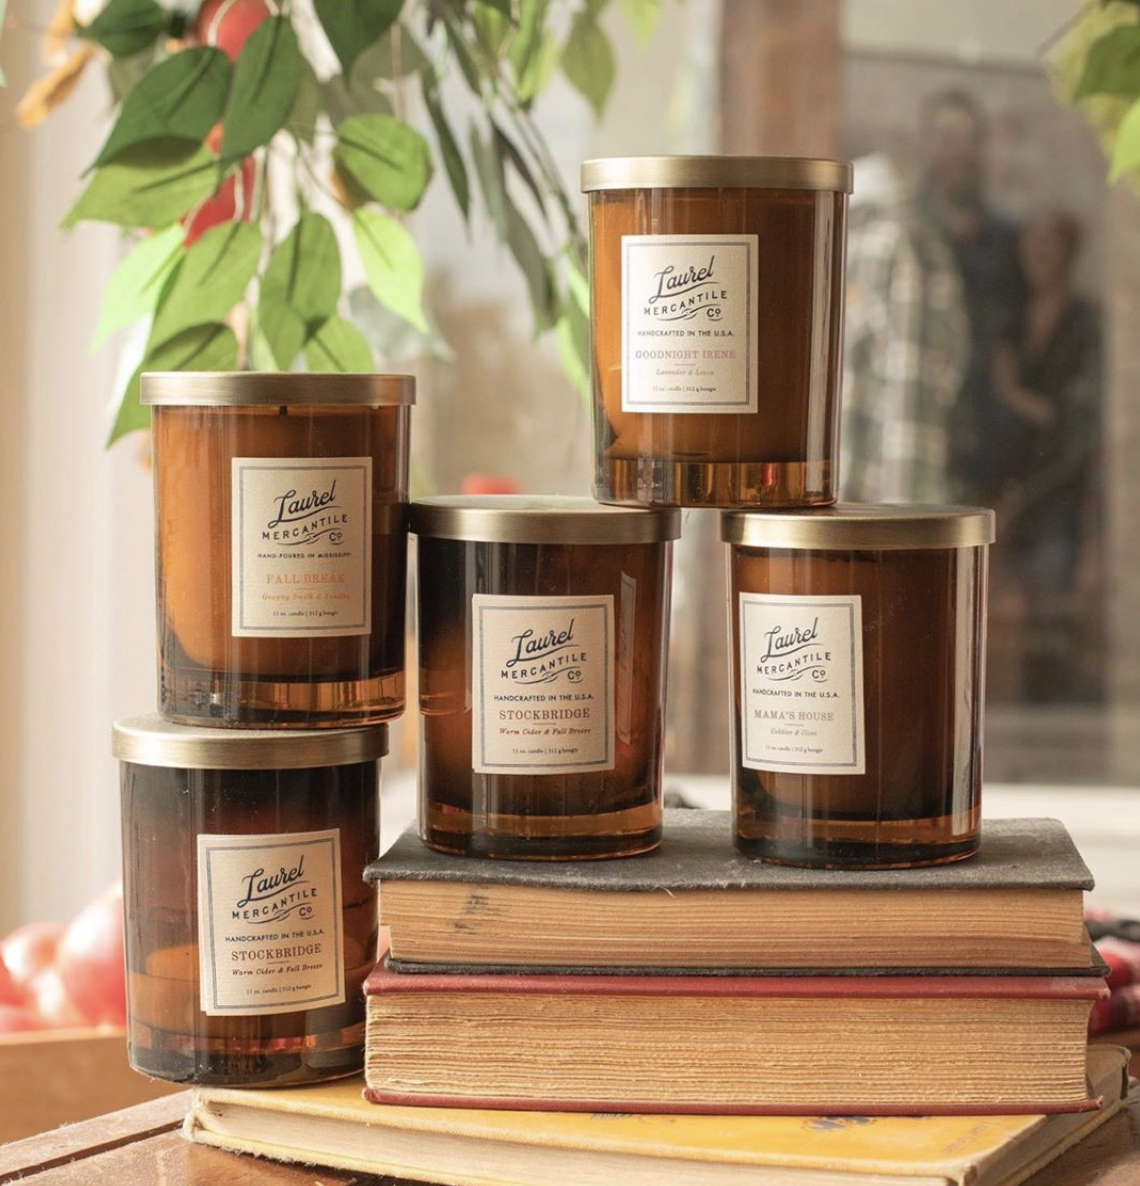 5 laurel mercantile fall candles displayed on books